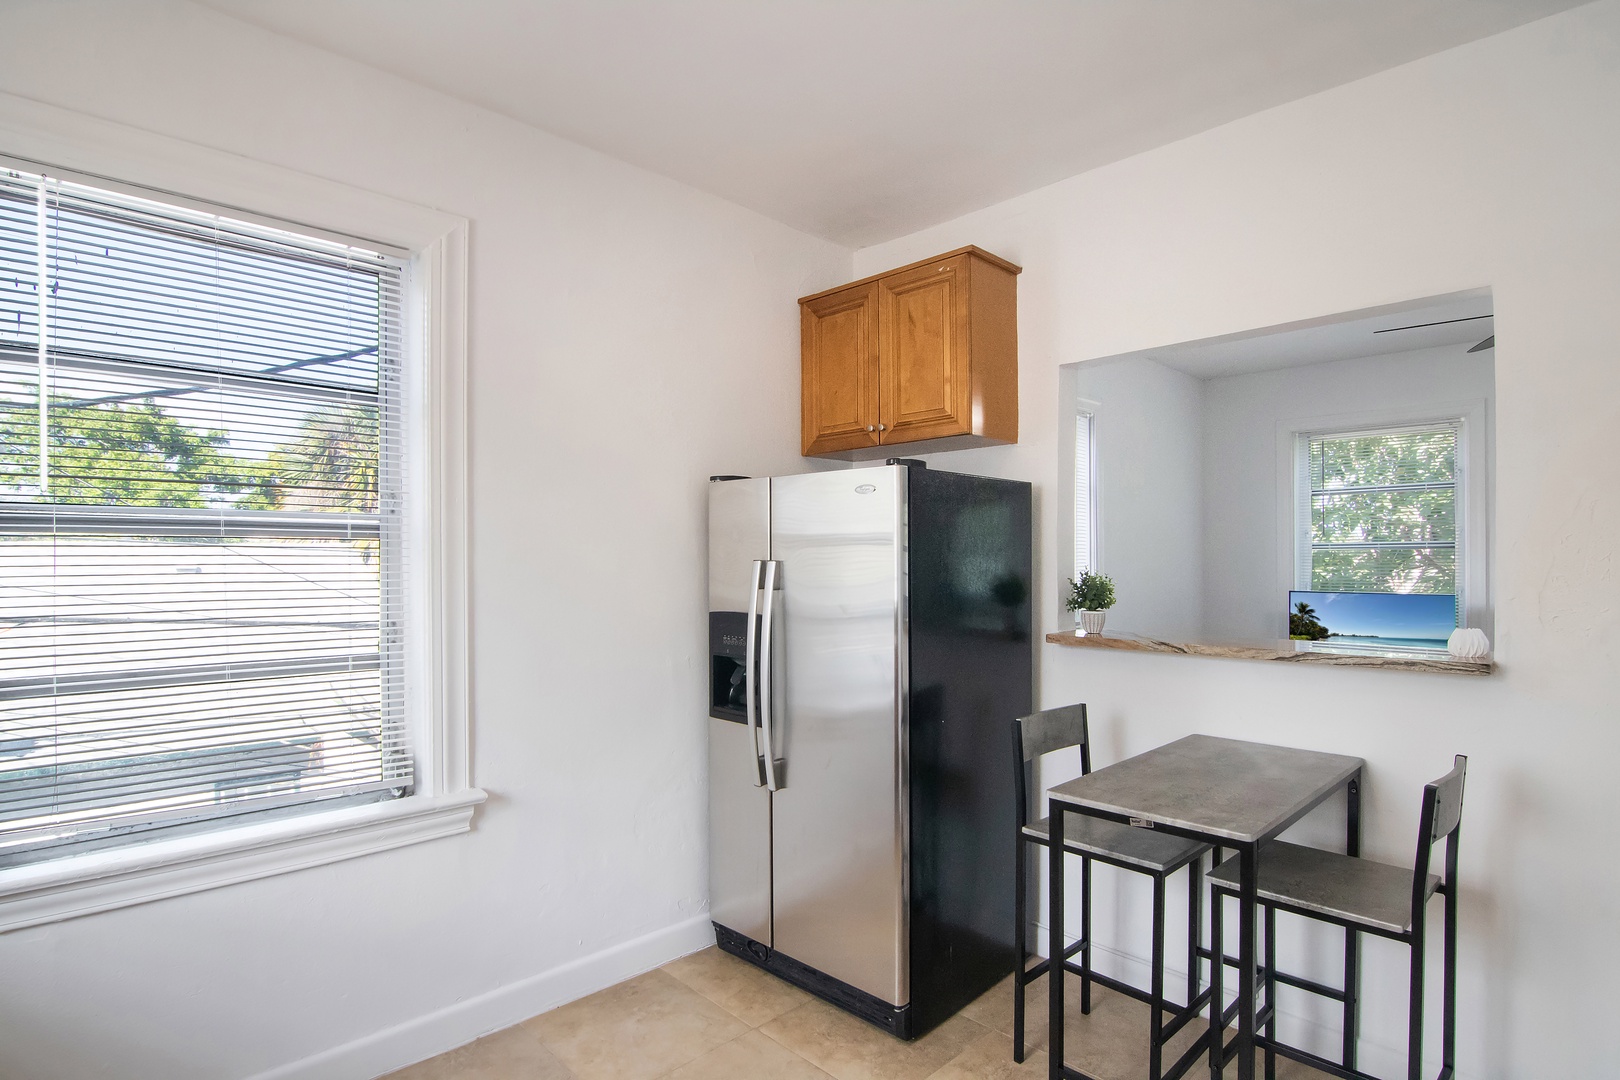 This ground-level studio offers a sunny, well-equipped kitchen with Dining seating for 2